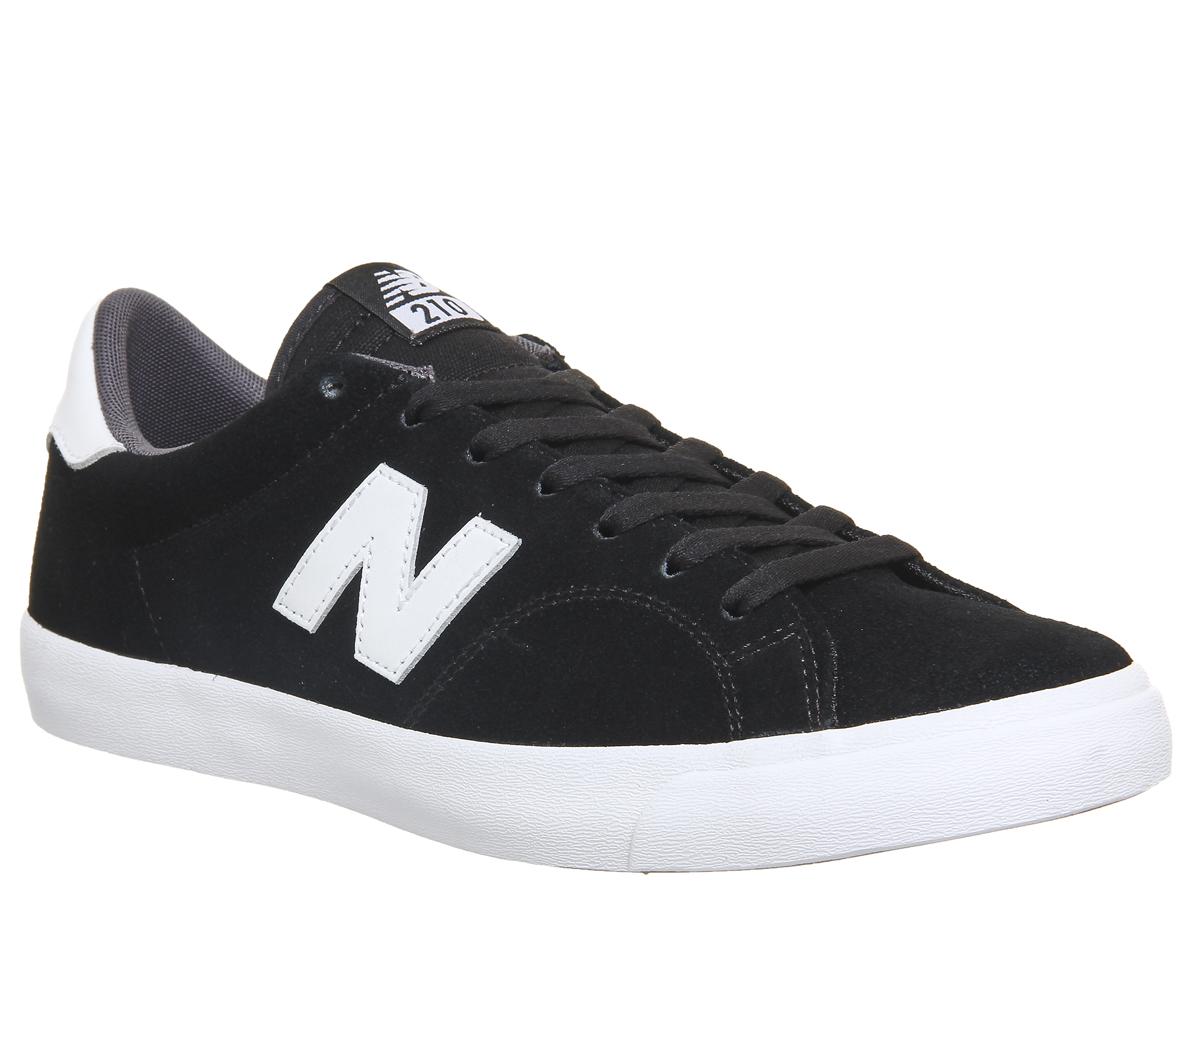 New Balance Am210 Trainers Black - His trainers